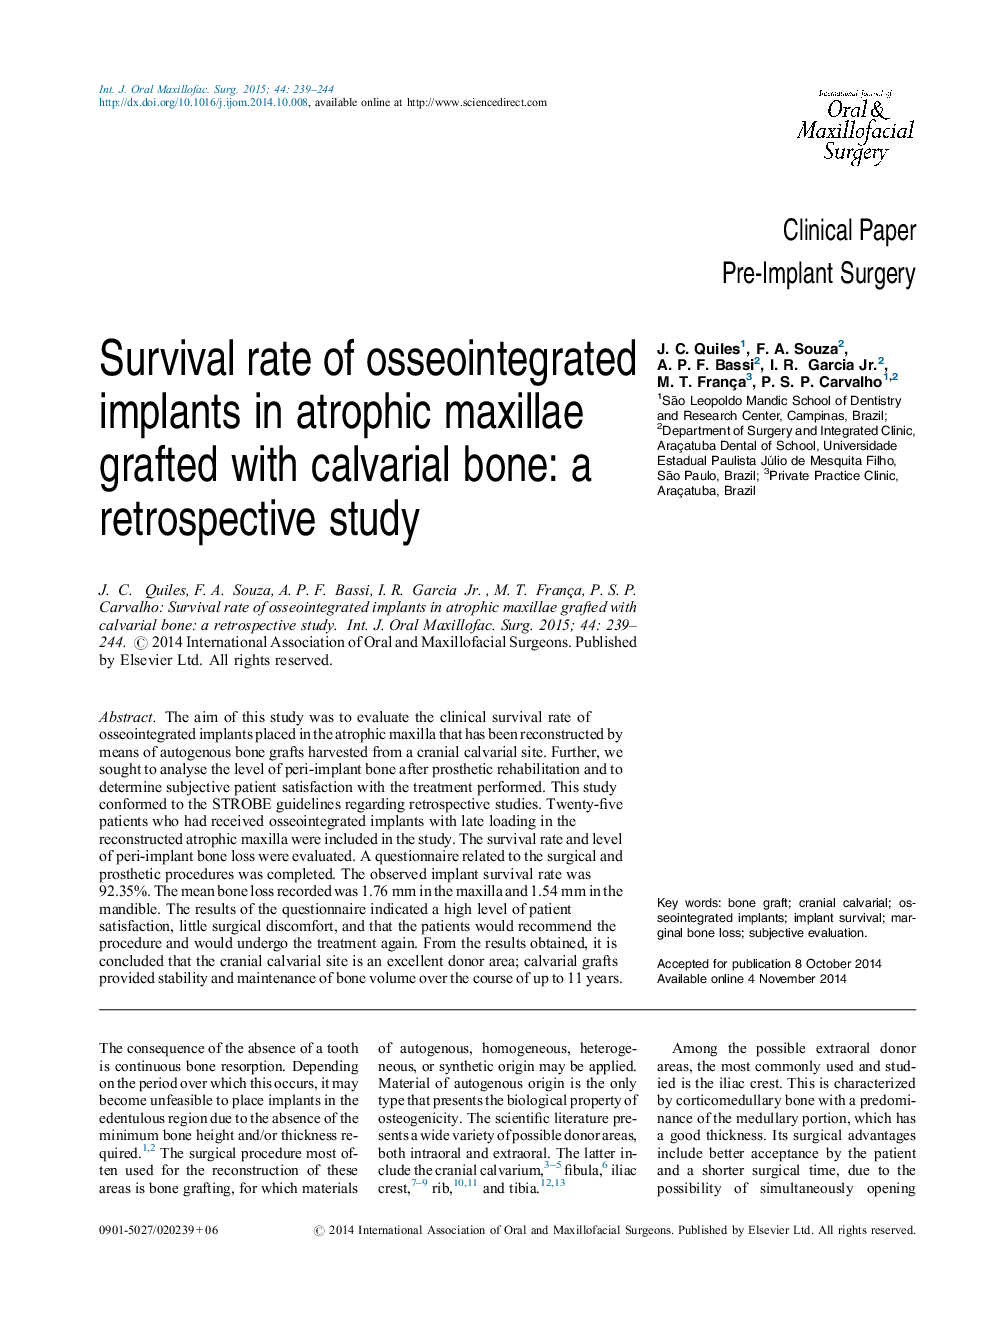 Survival rate of osseointegrated implants in atrophic maxillae grafted with calvarial bone: a retrospective study